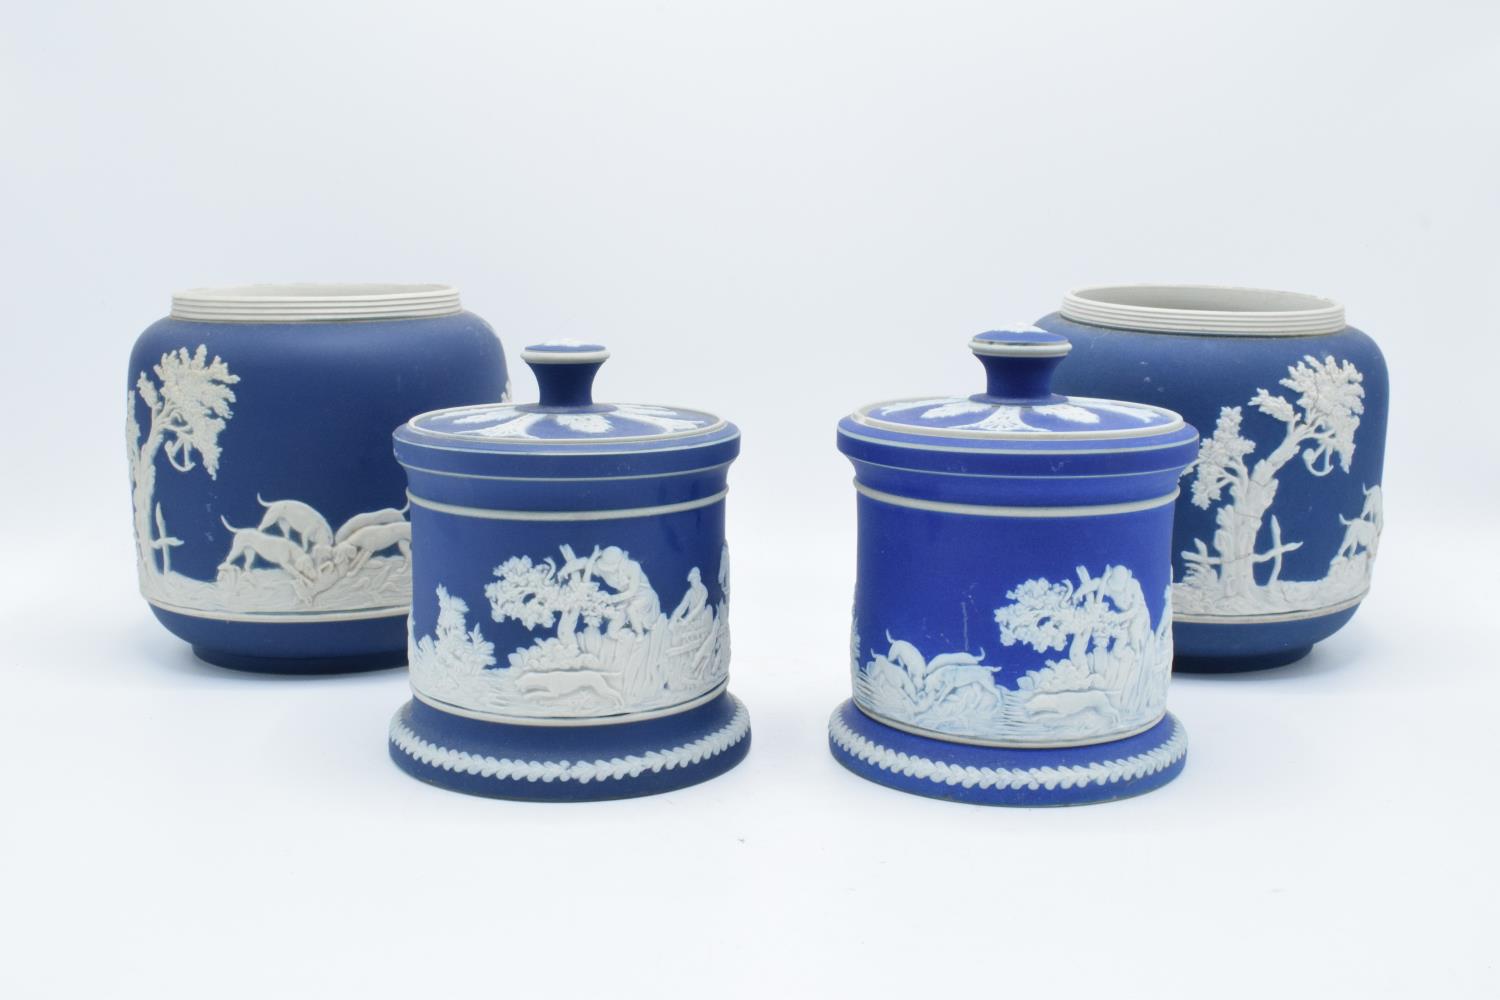 A collection of Adams of Tunstall blue jasperware to include 2 bulbous vases with threaded rims